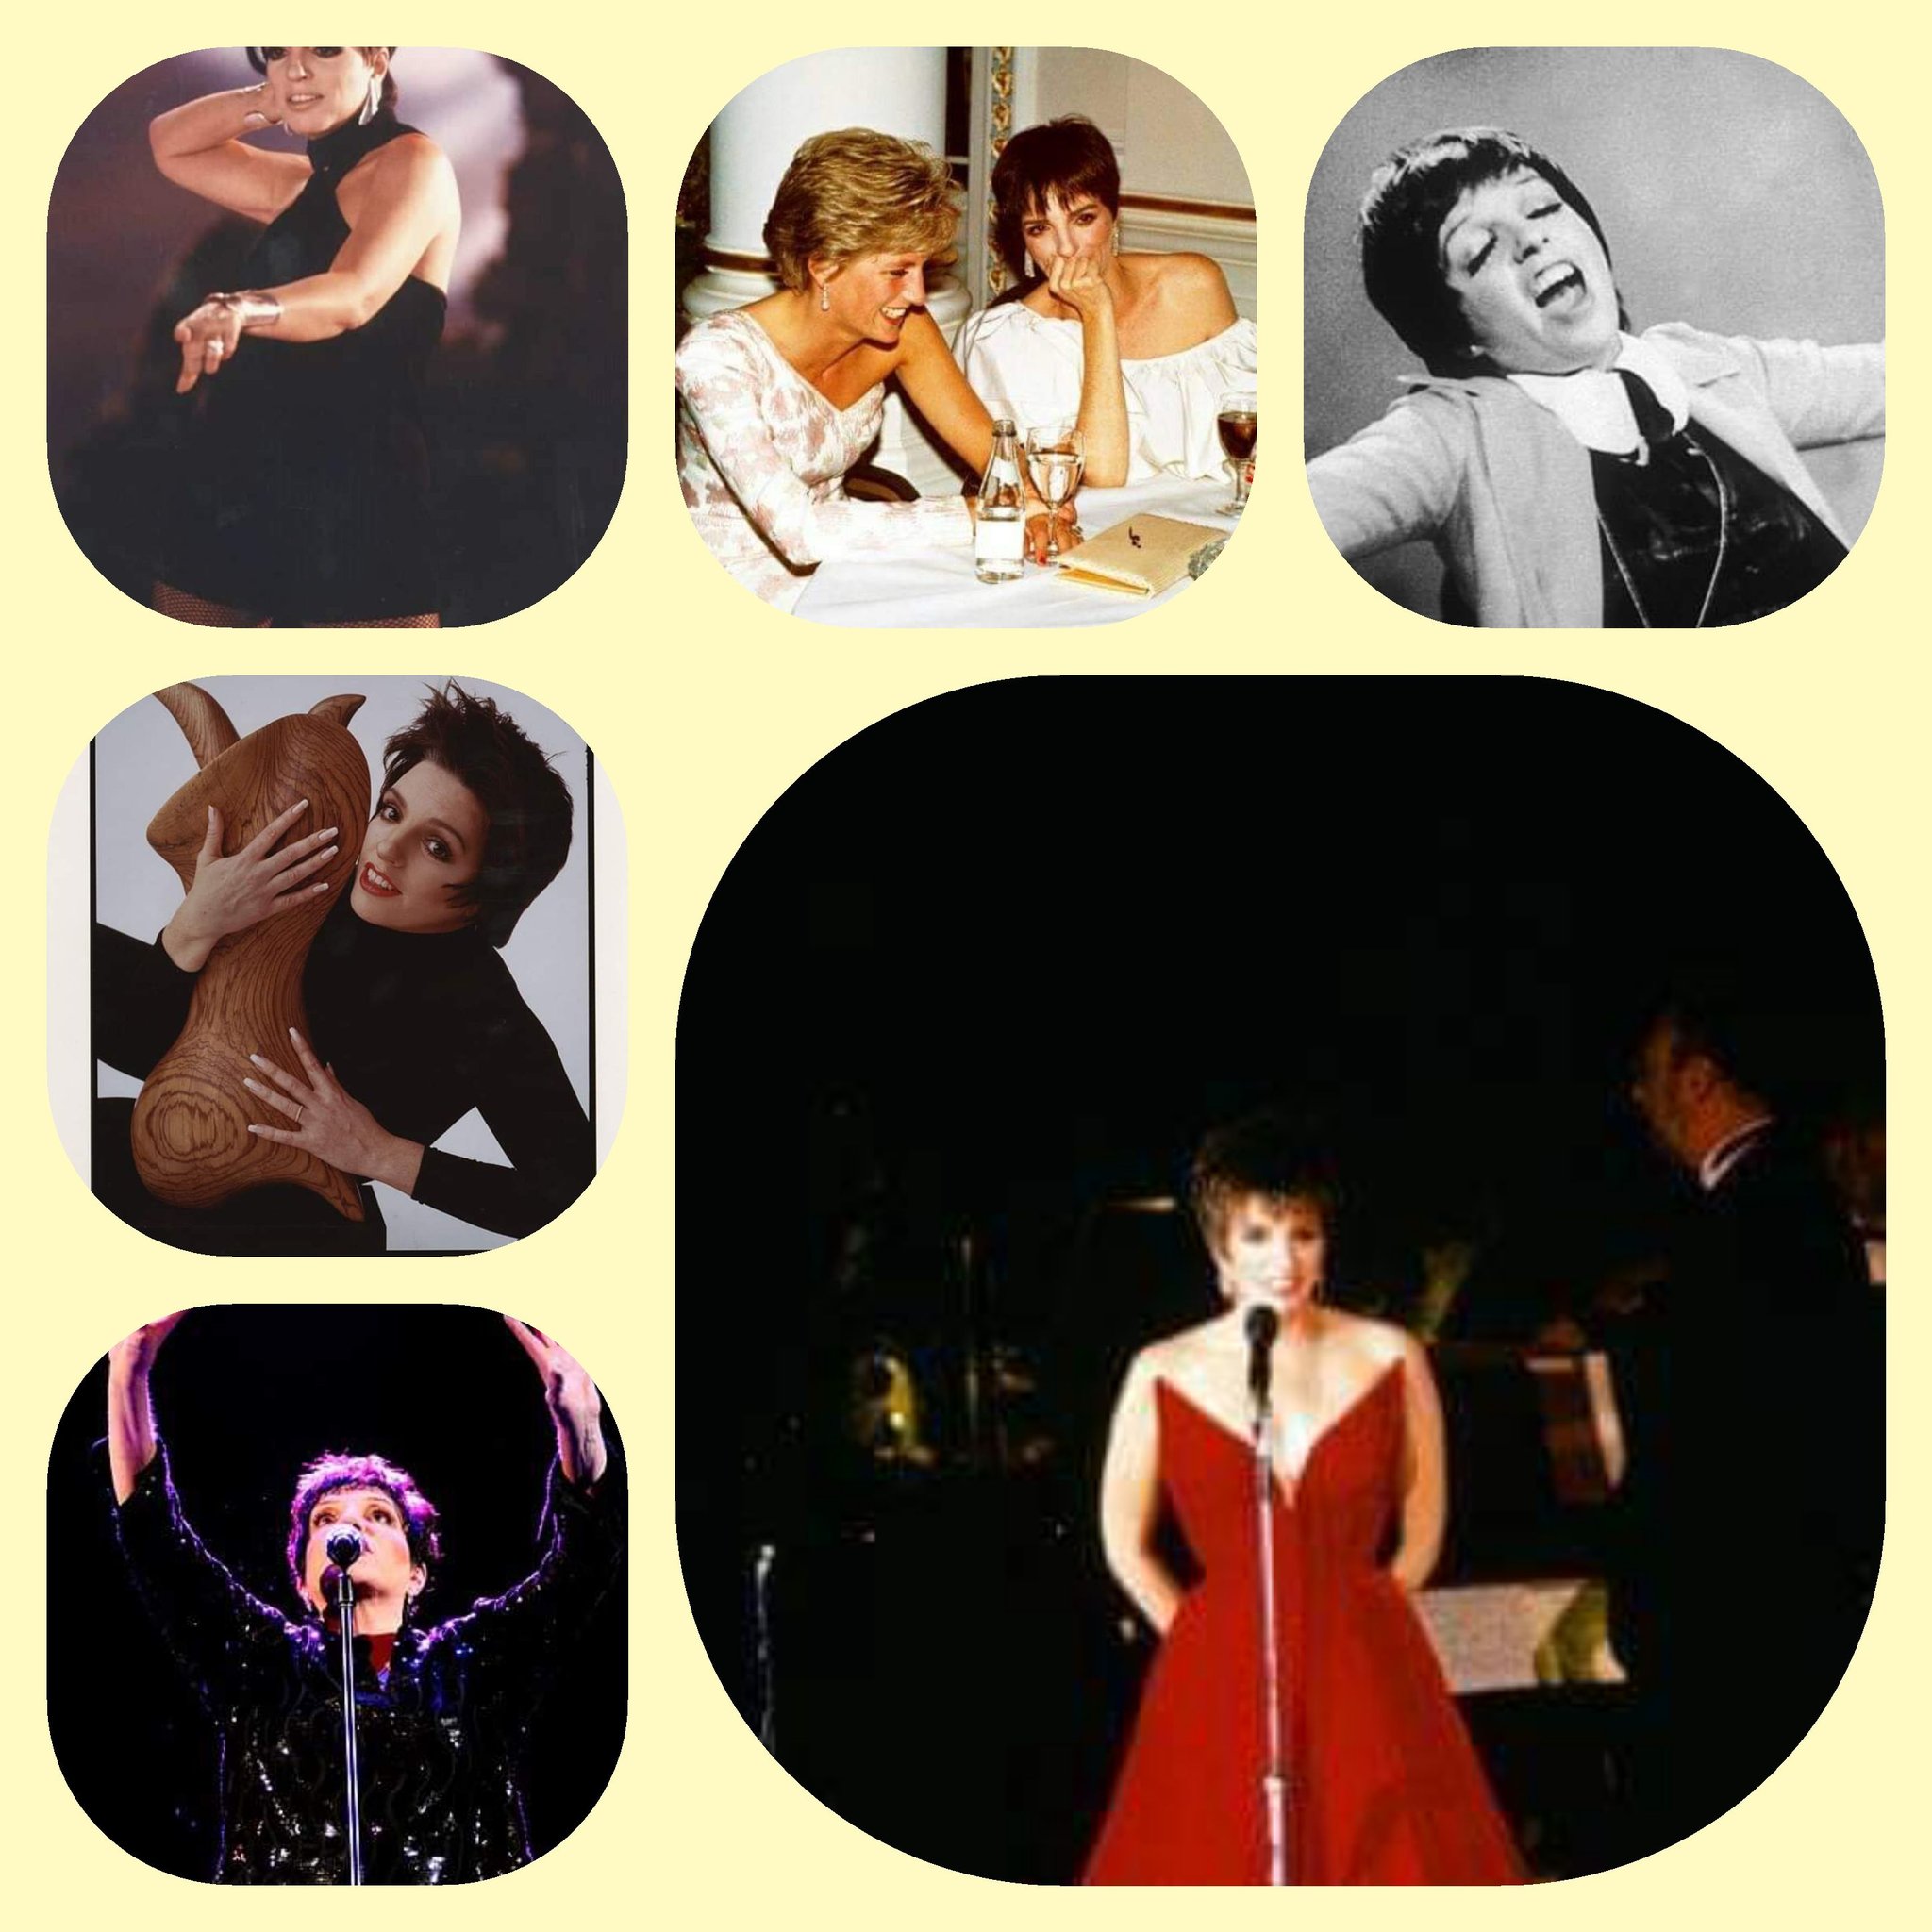 Happy Birthday wishes to LIZA MINNELLI. Have the best day, Liza!  Sending love and Happy Memories. XOXO! 